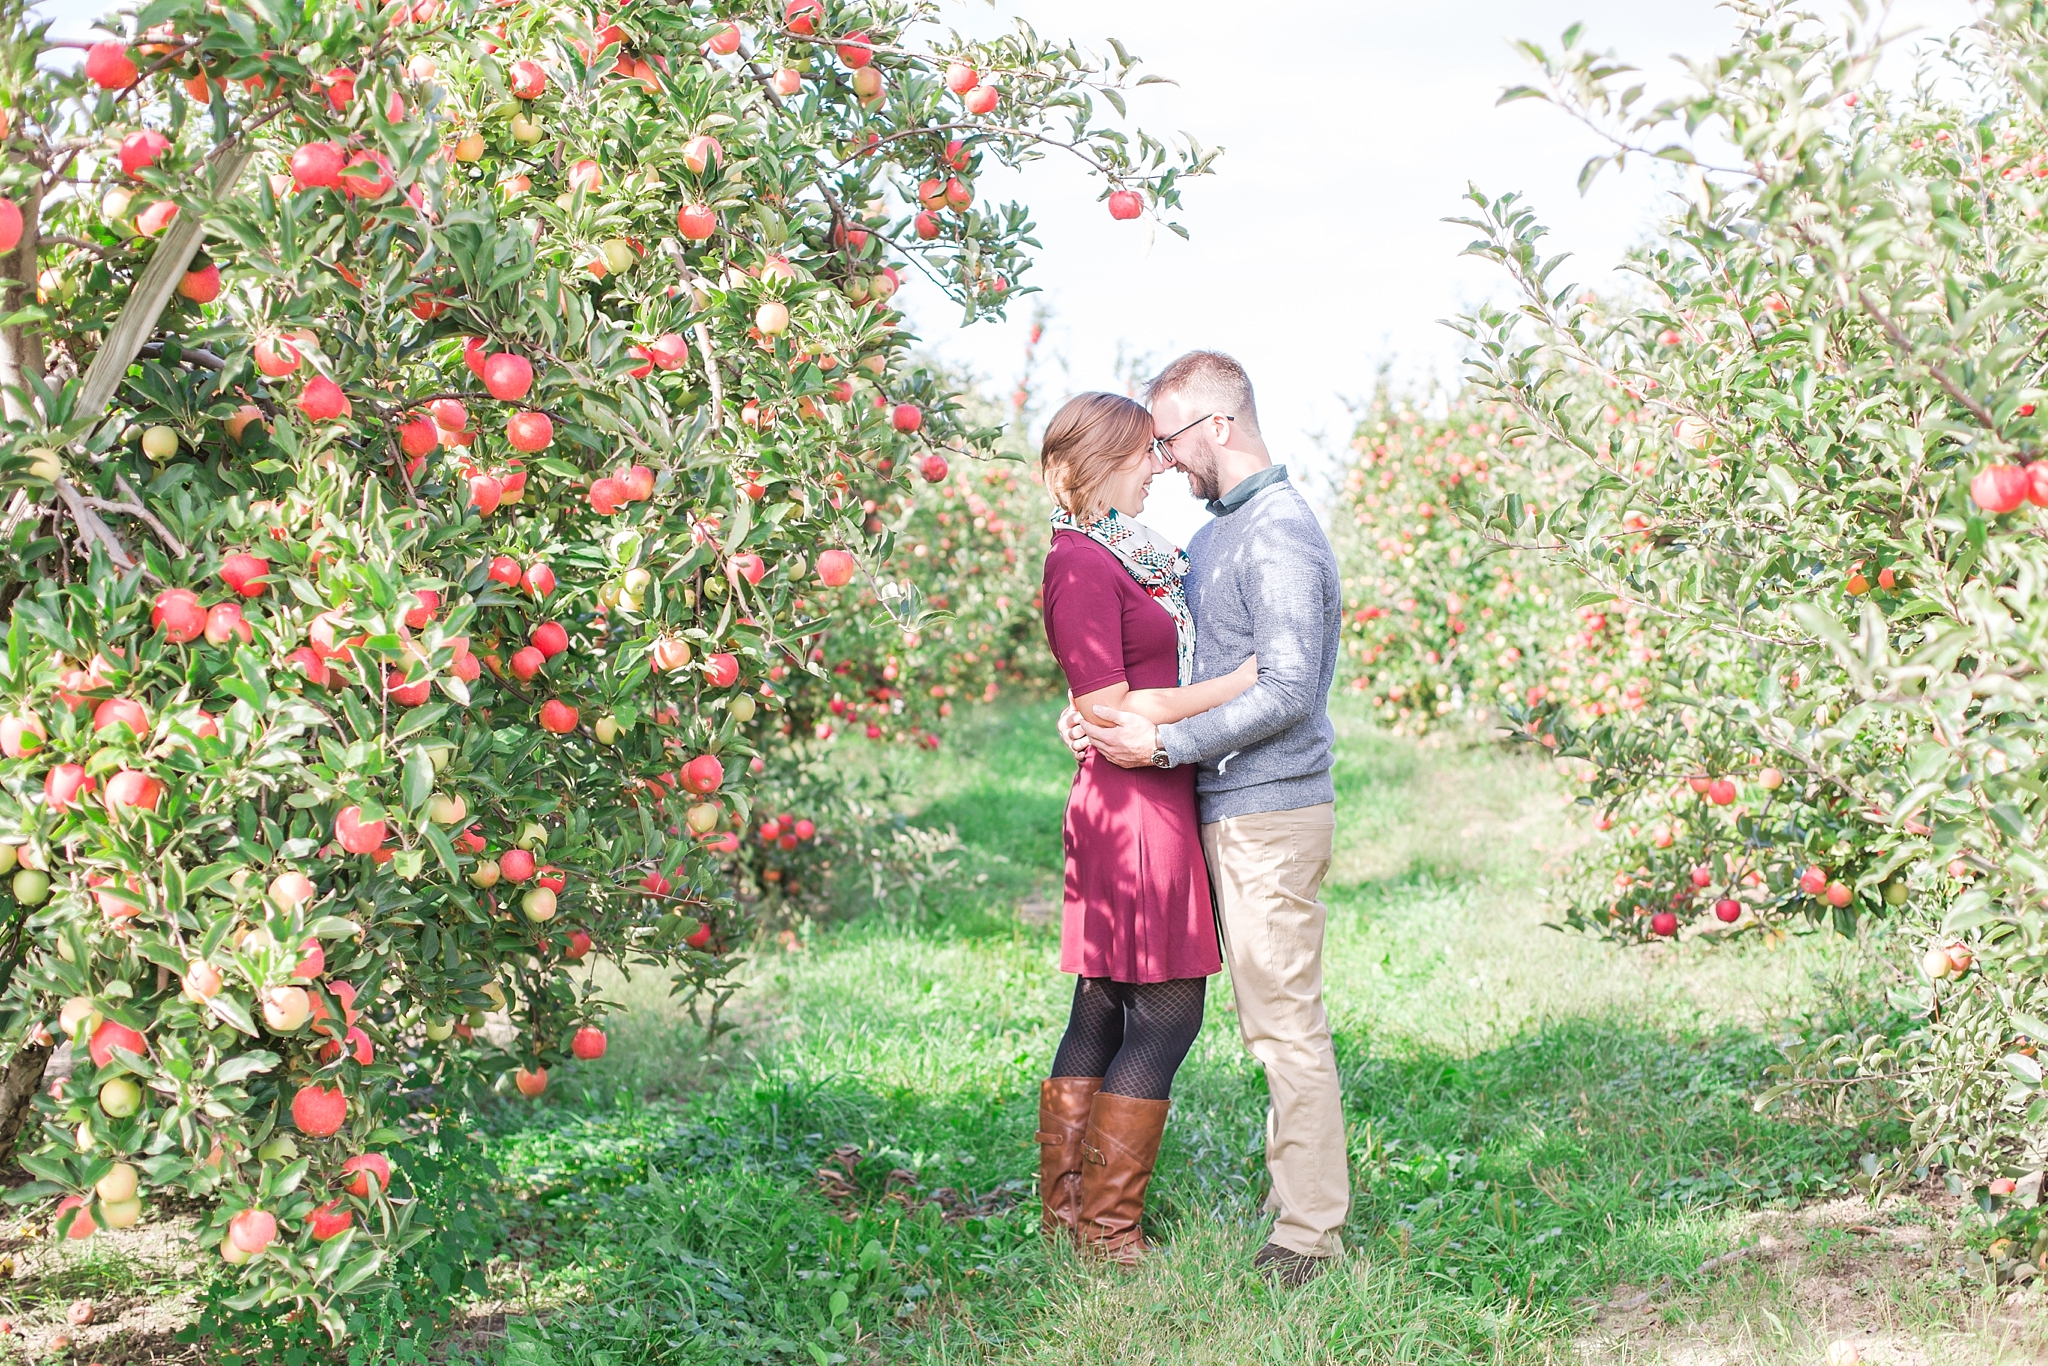 playful-fall-engagement-photos-at-hy's-cider-mill-ochard-in-bruce-township-michigan-by-courtney-carolyn-photography_0027.jpg